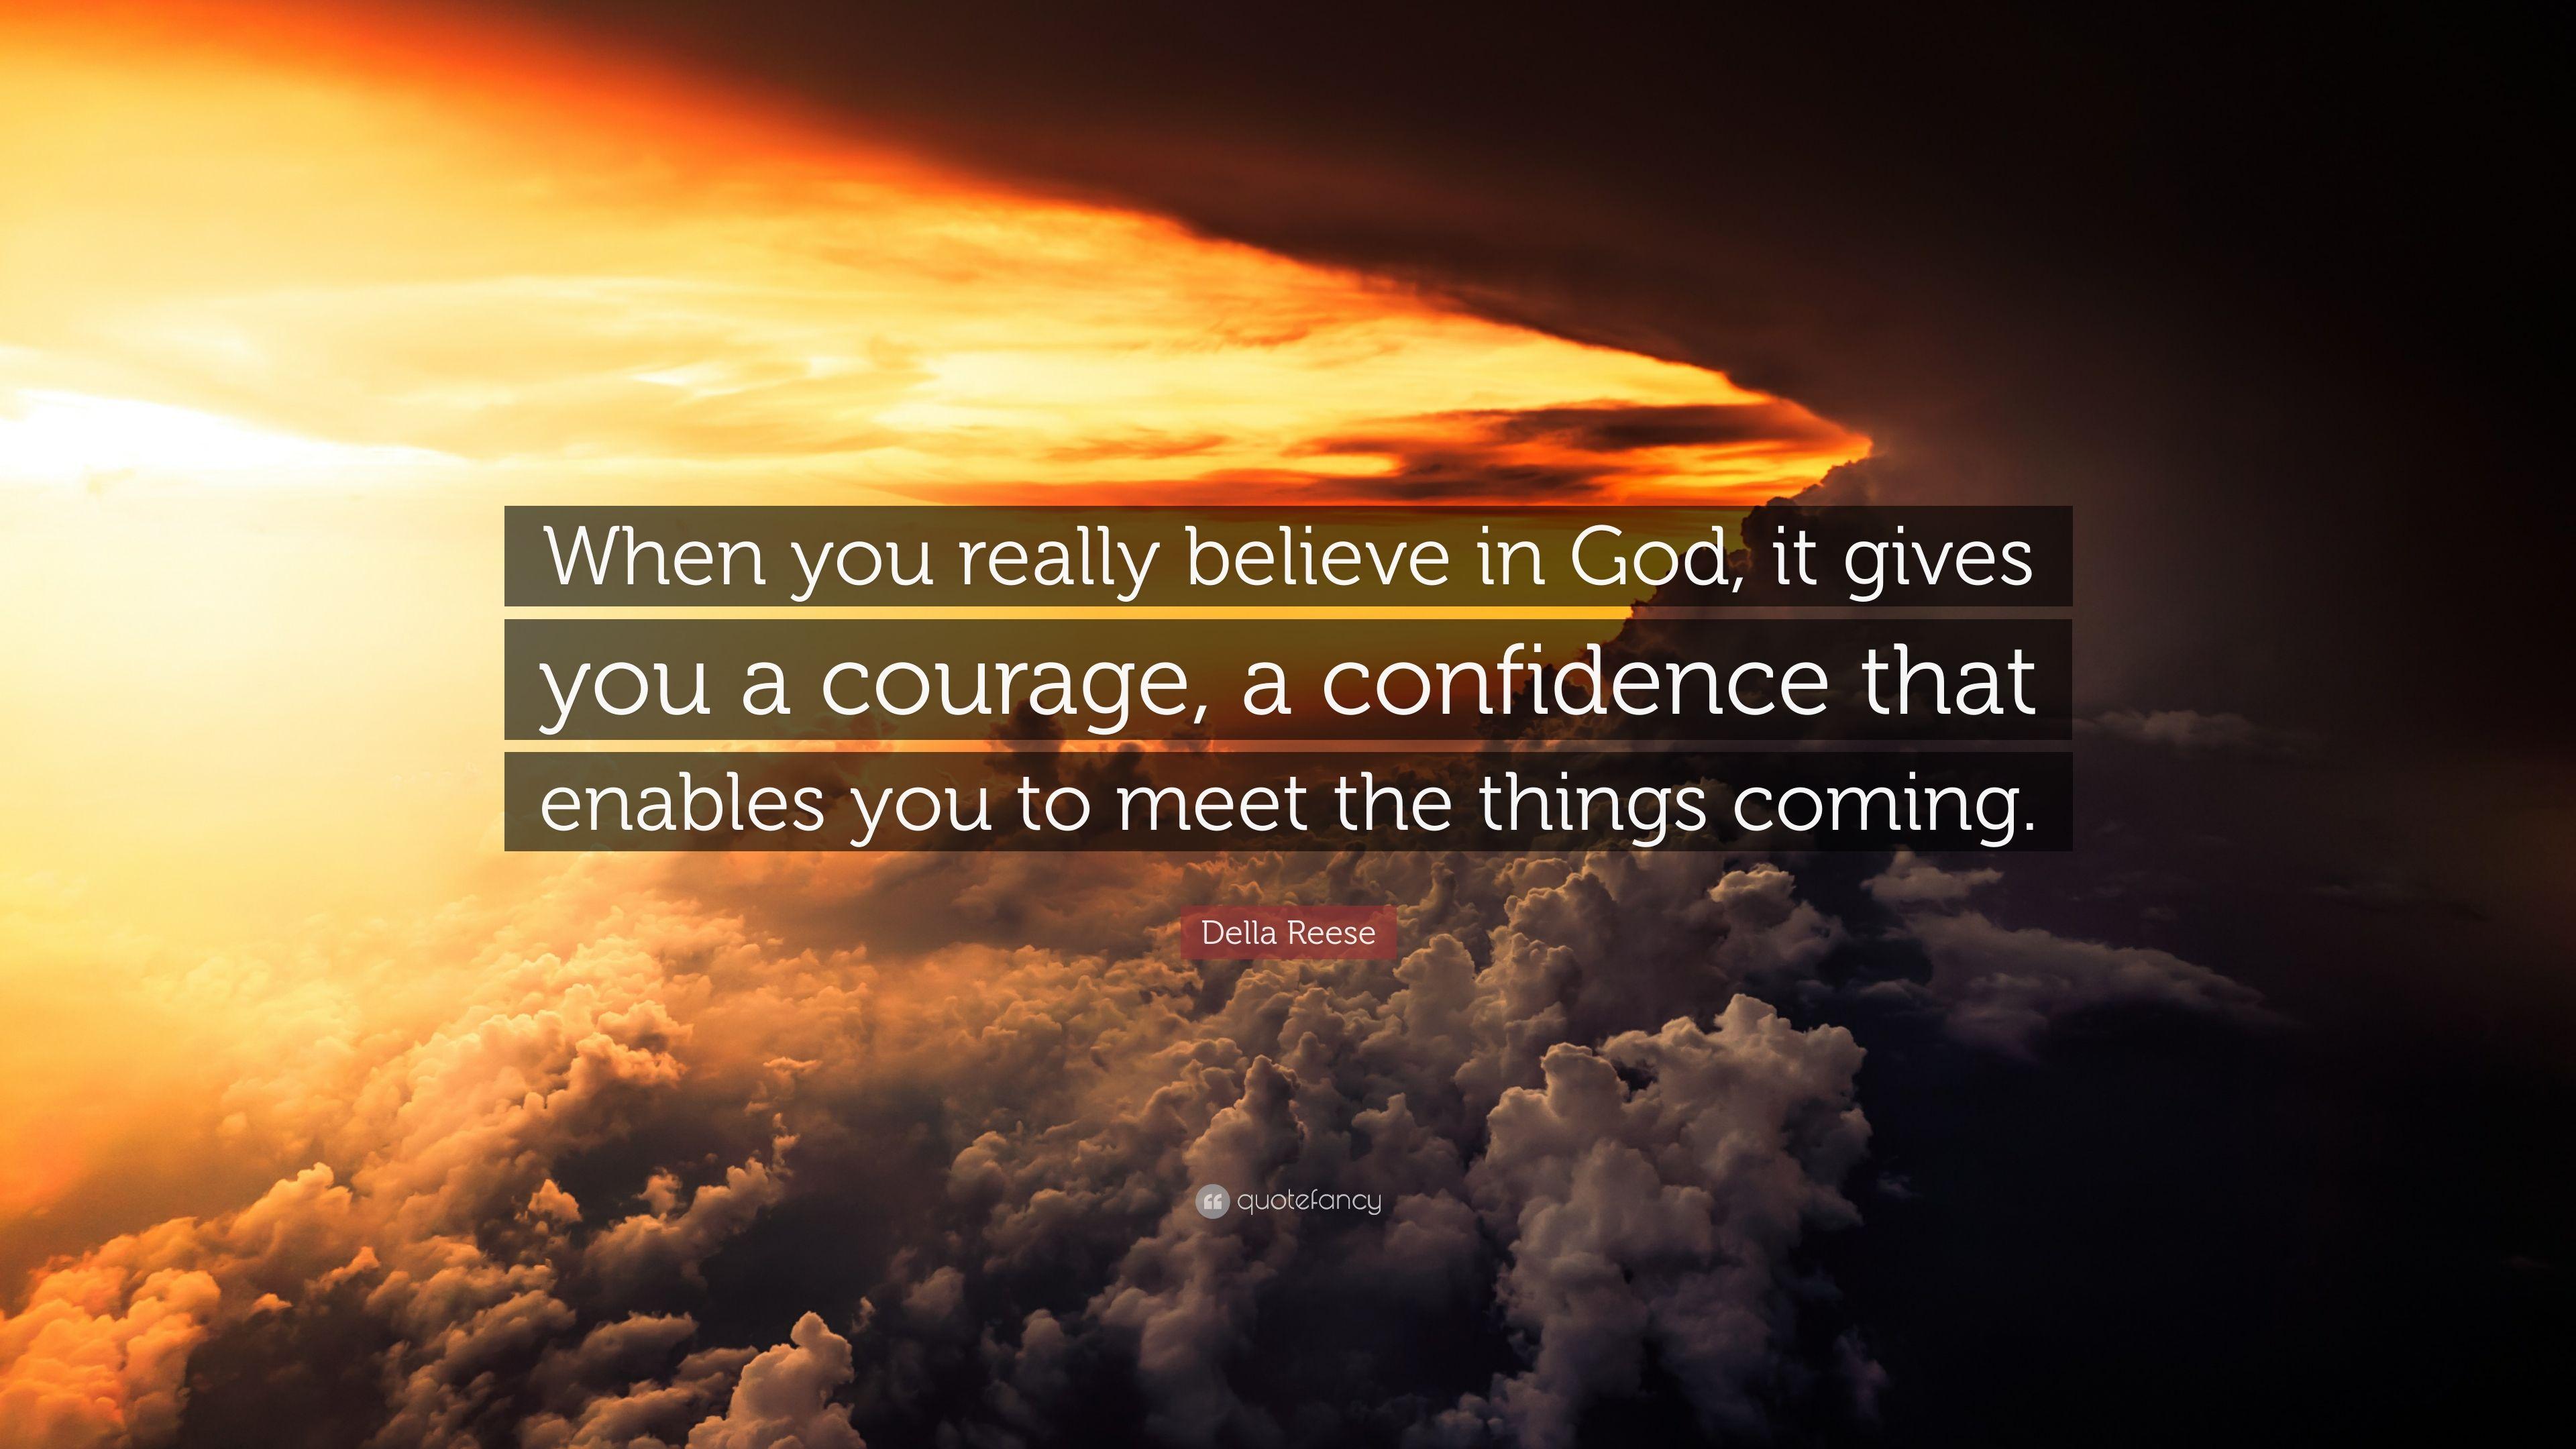 Della Reese Quote: “When you really believe in God, it gives you a